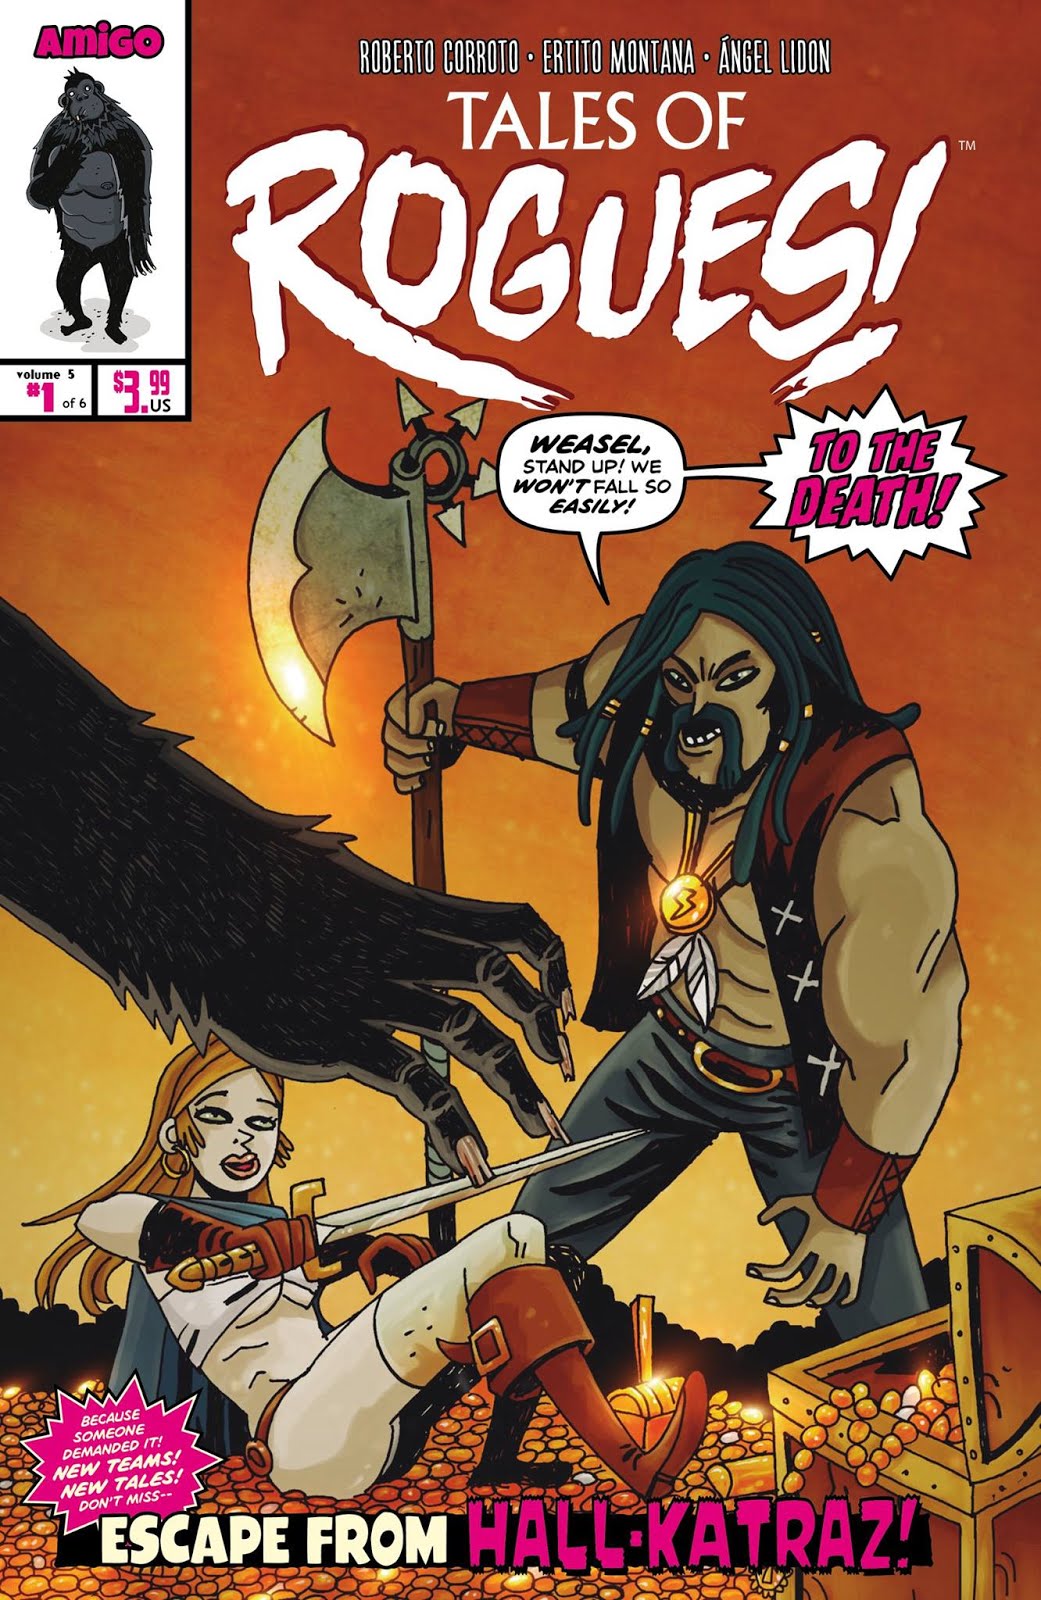 TALES OF ROGUES #1